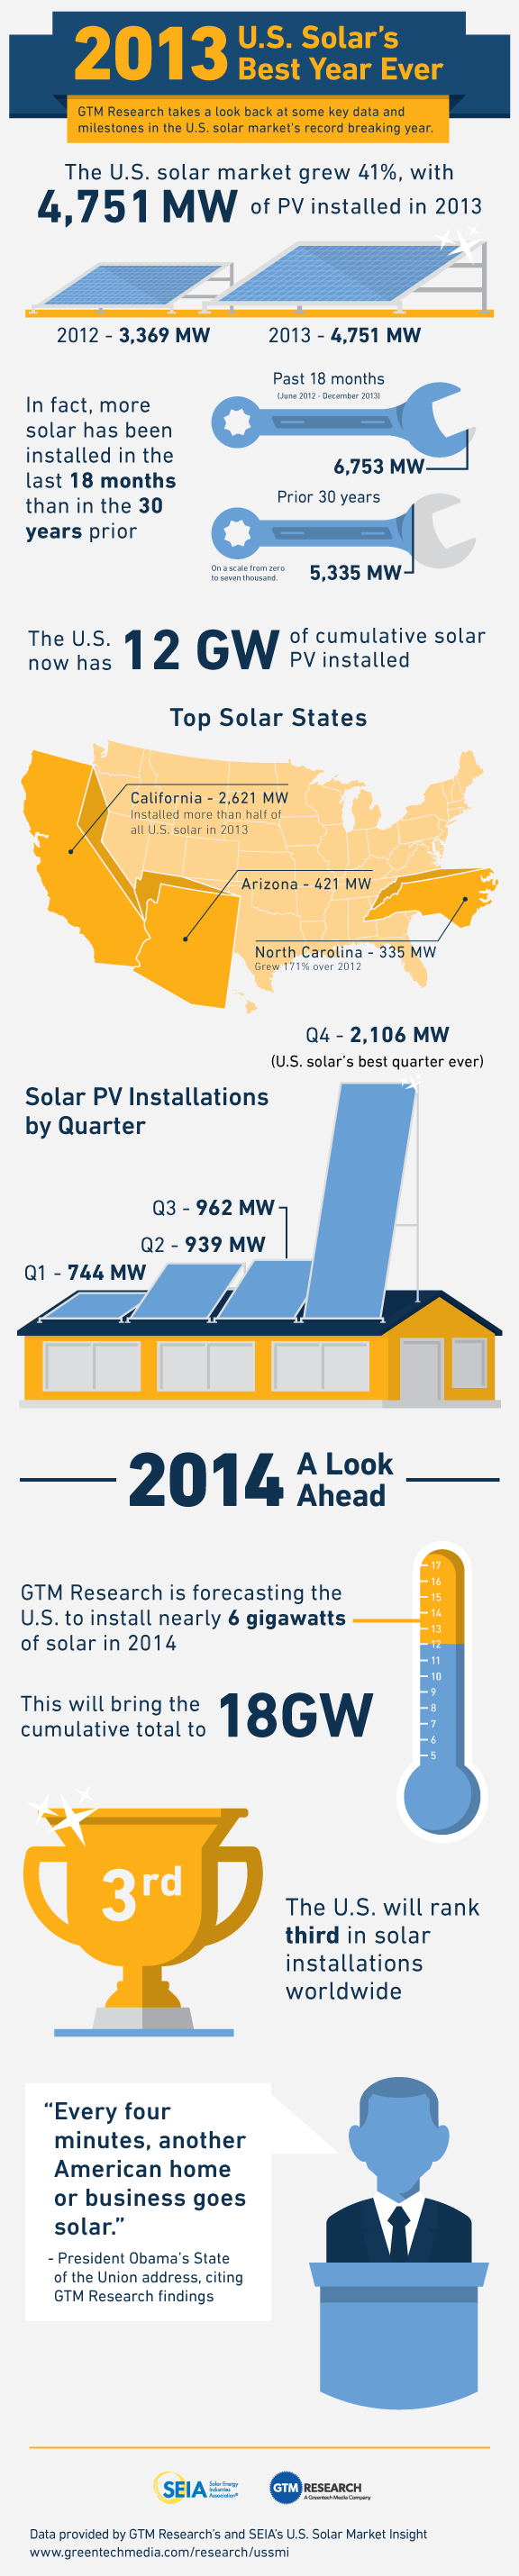 2013-US-Best-Solar-Year-Ever-graphic2.png